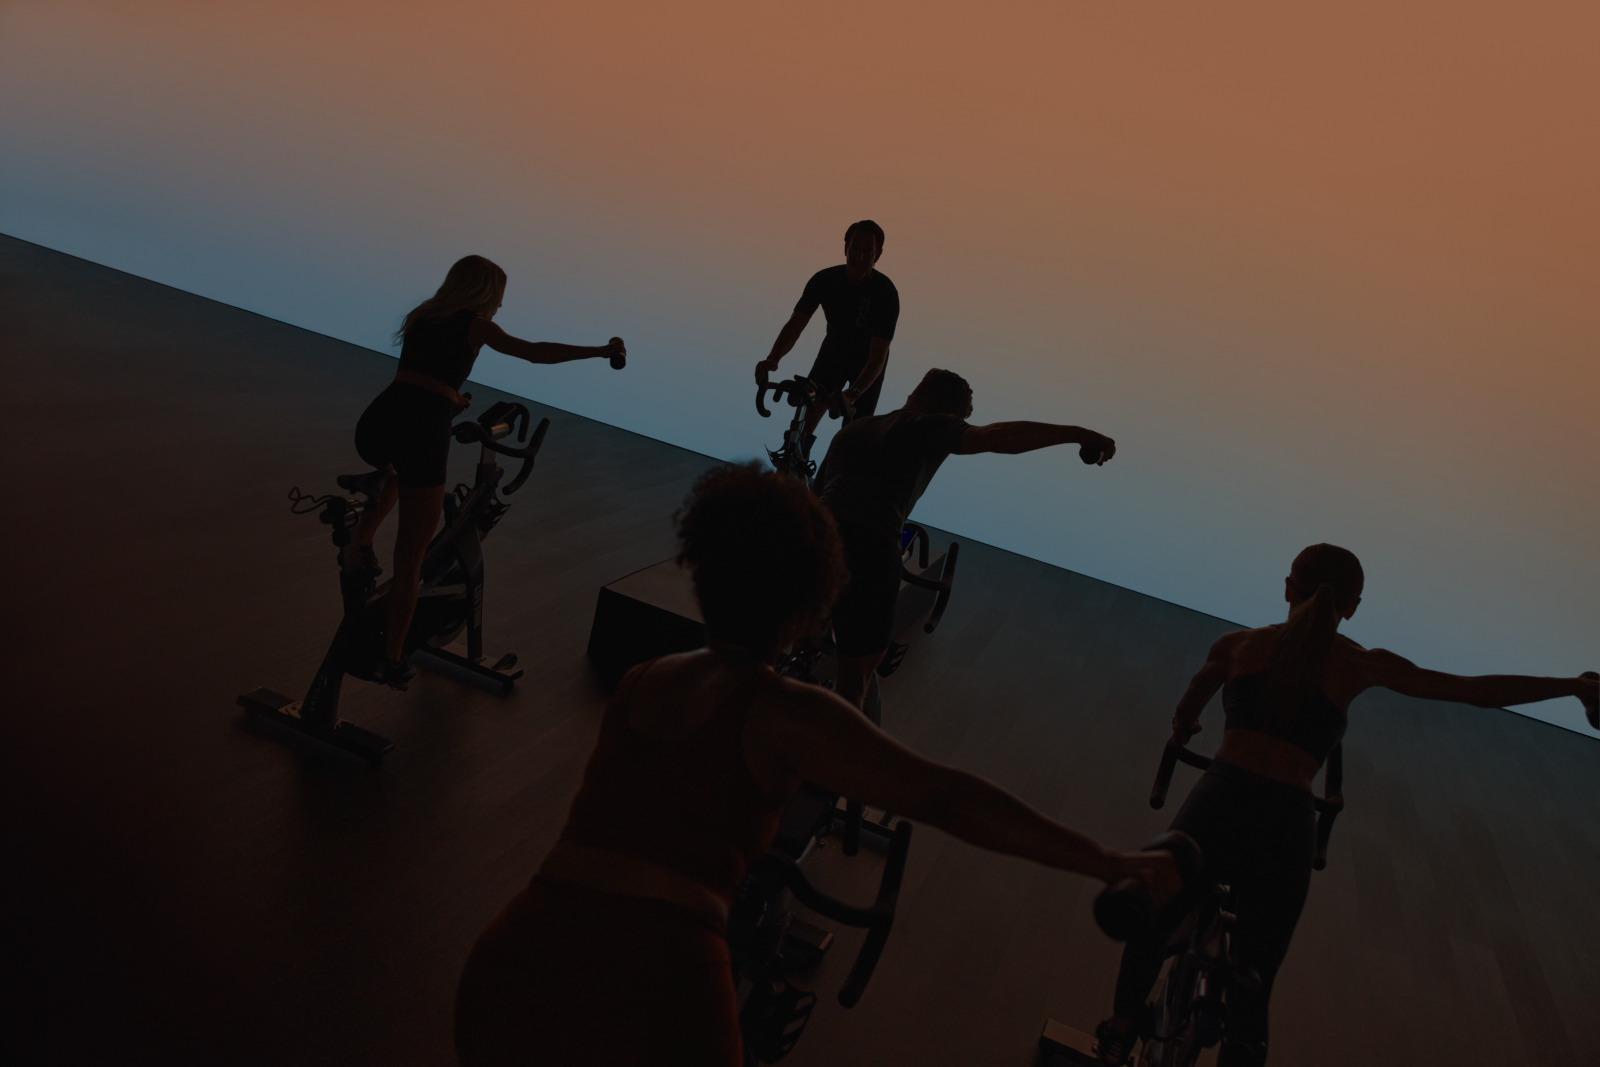 EDG spin class riding in silhouette, riders with their right arms extended holding a weight